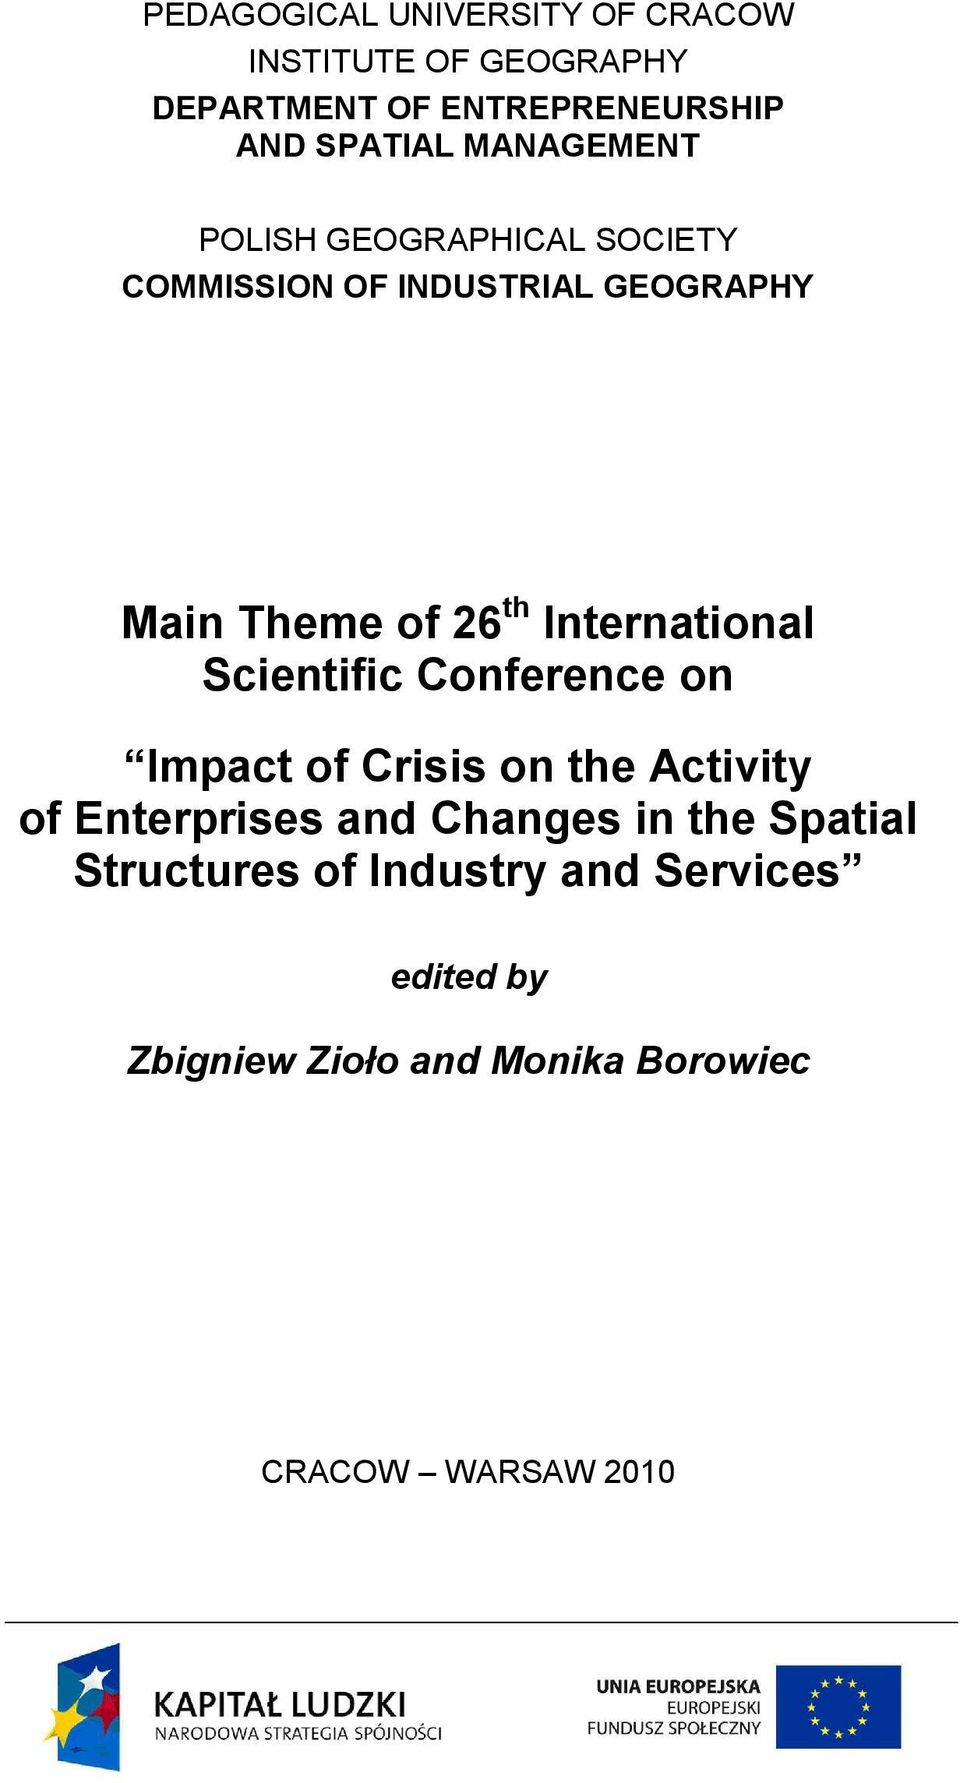 International Scientific Conference on Impact of Crisis on the Activity of Enterprises and Changes in